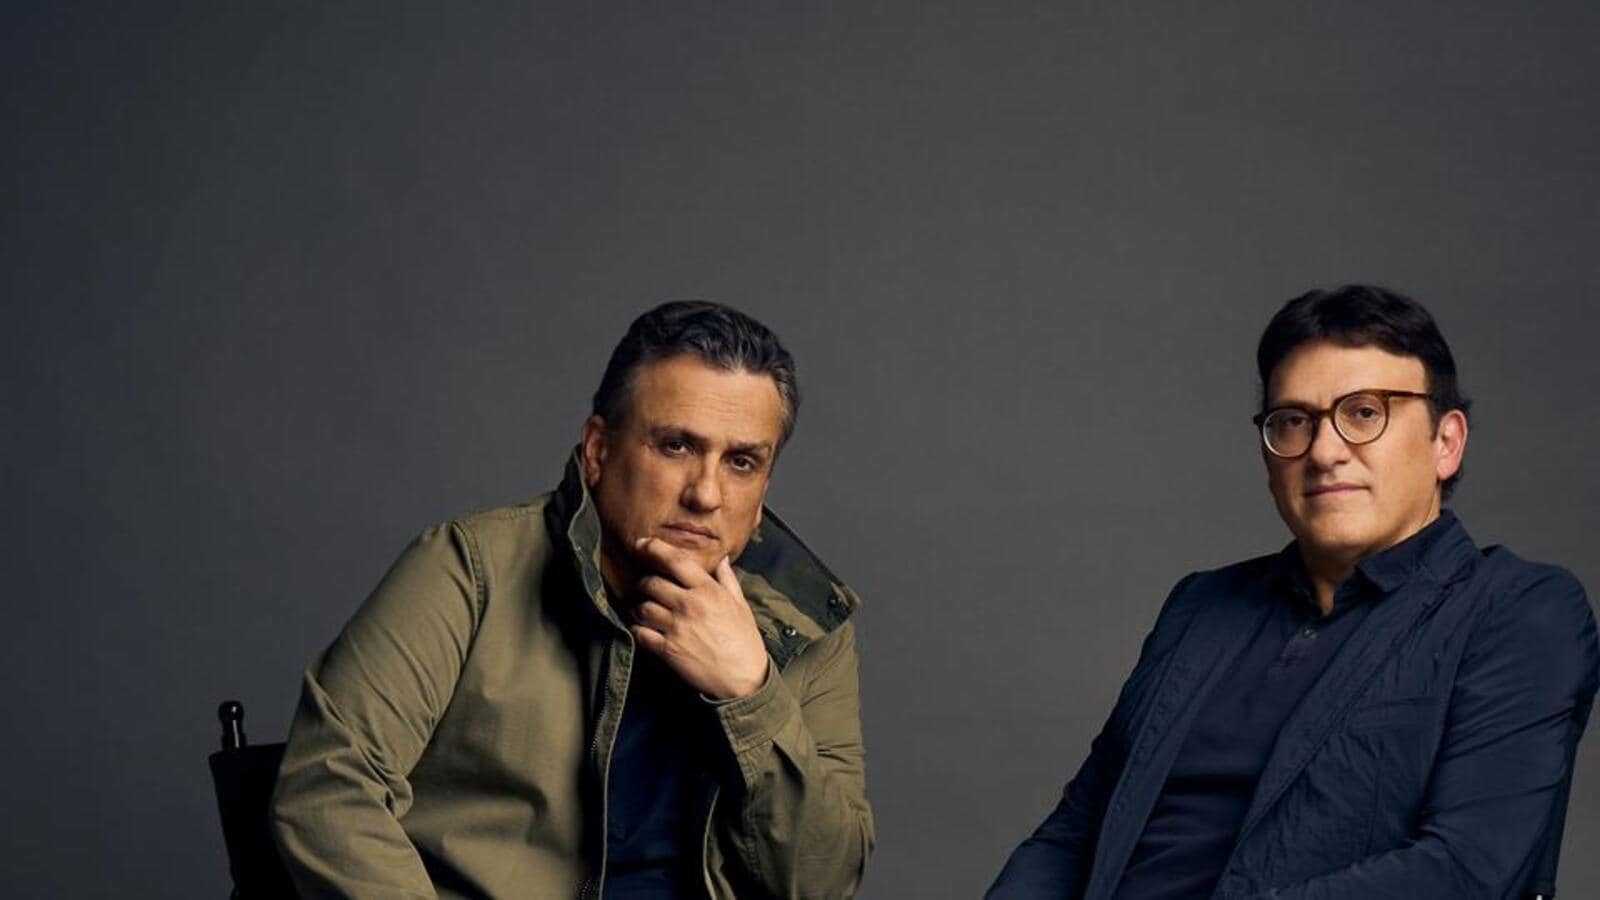 Russo Brothers: Our special focus is to bring India to the world through our stories